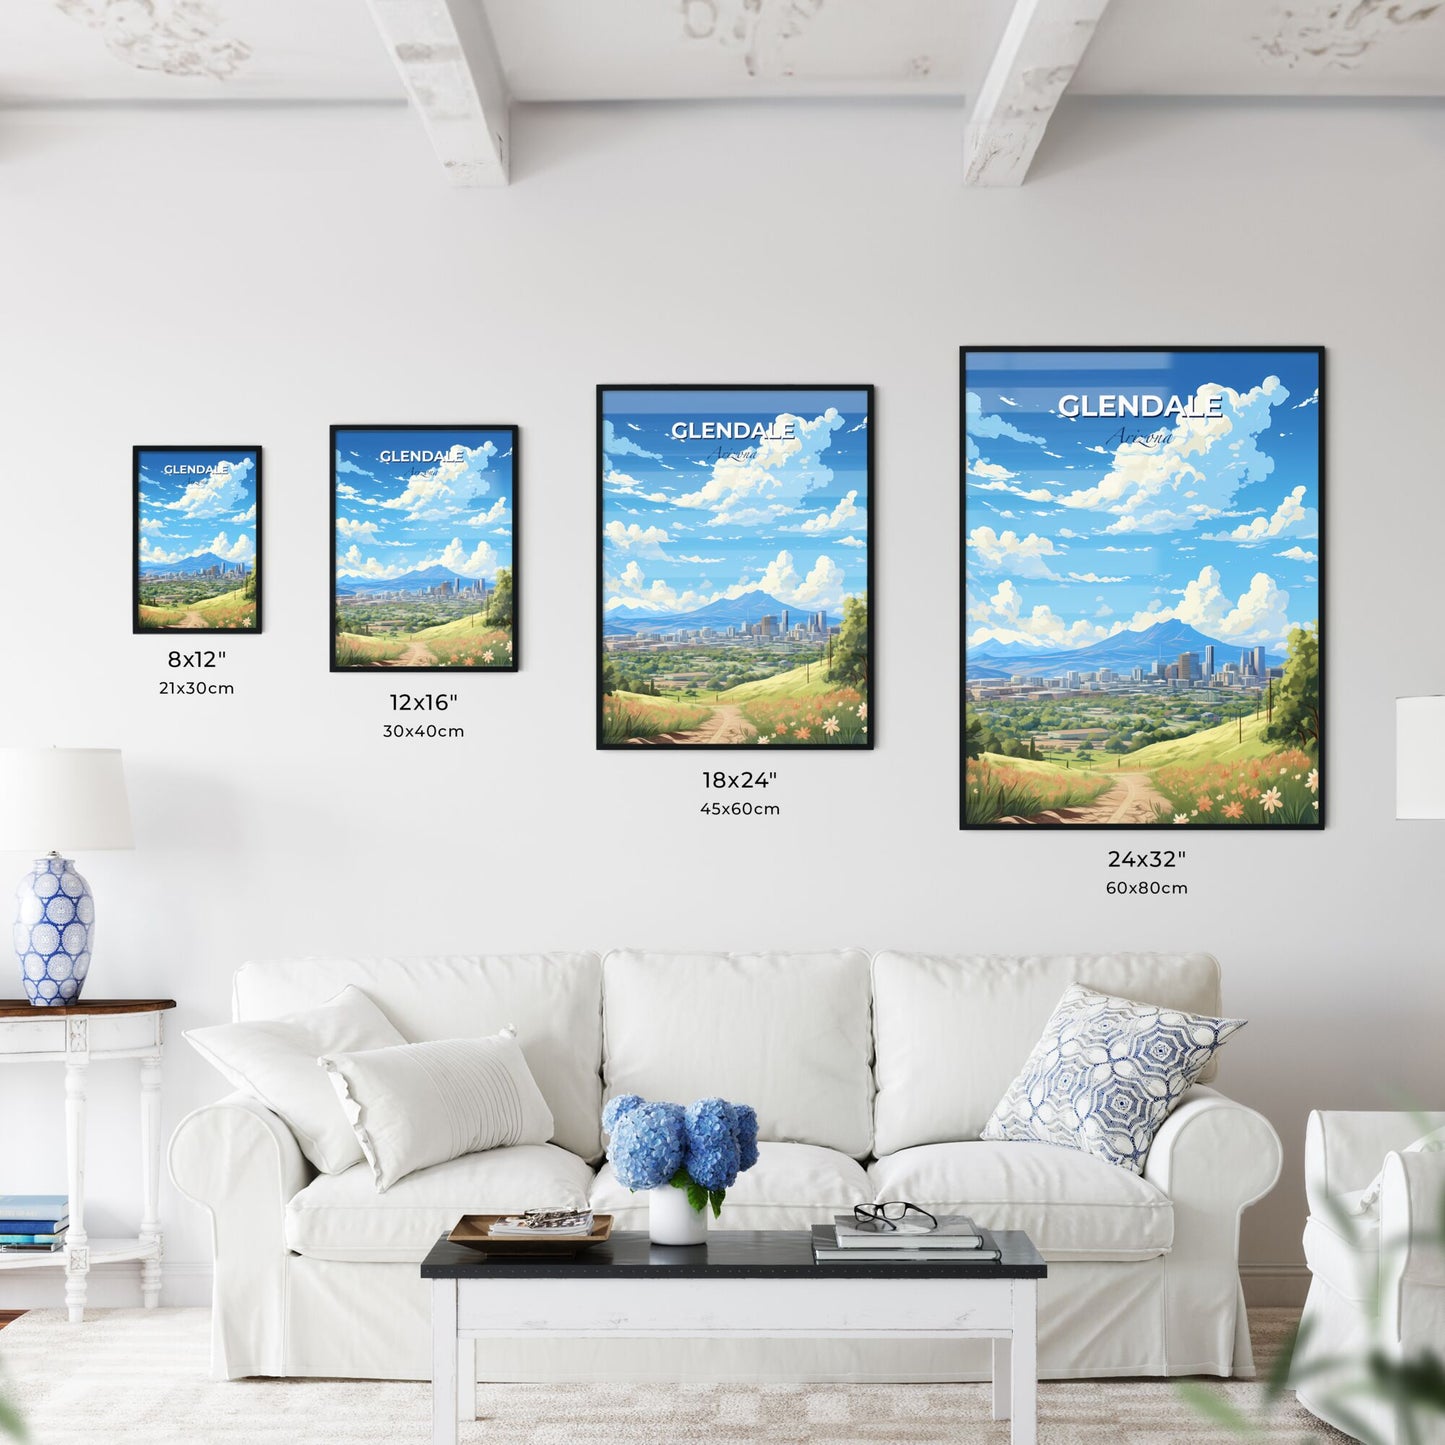 Glendale Arizona Skyline - A Landscape Of A City With A Mountain In The Background - Customizable Travel Gift Default Title